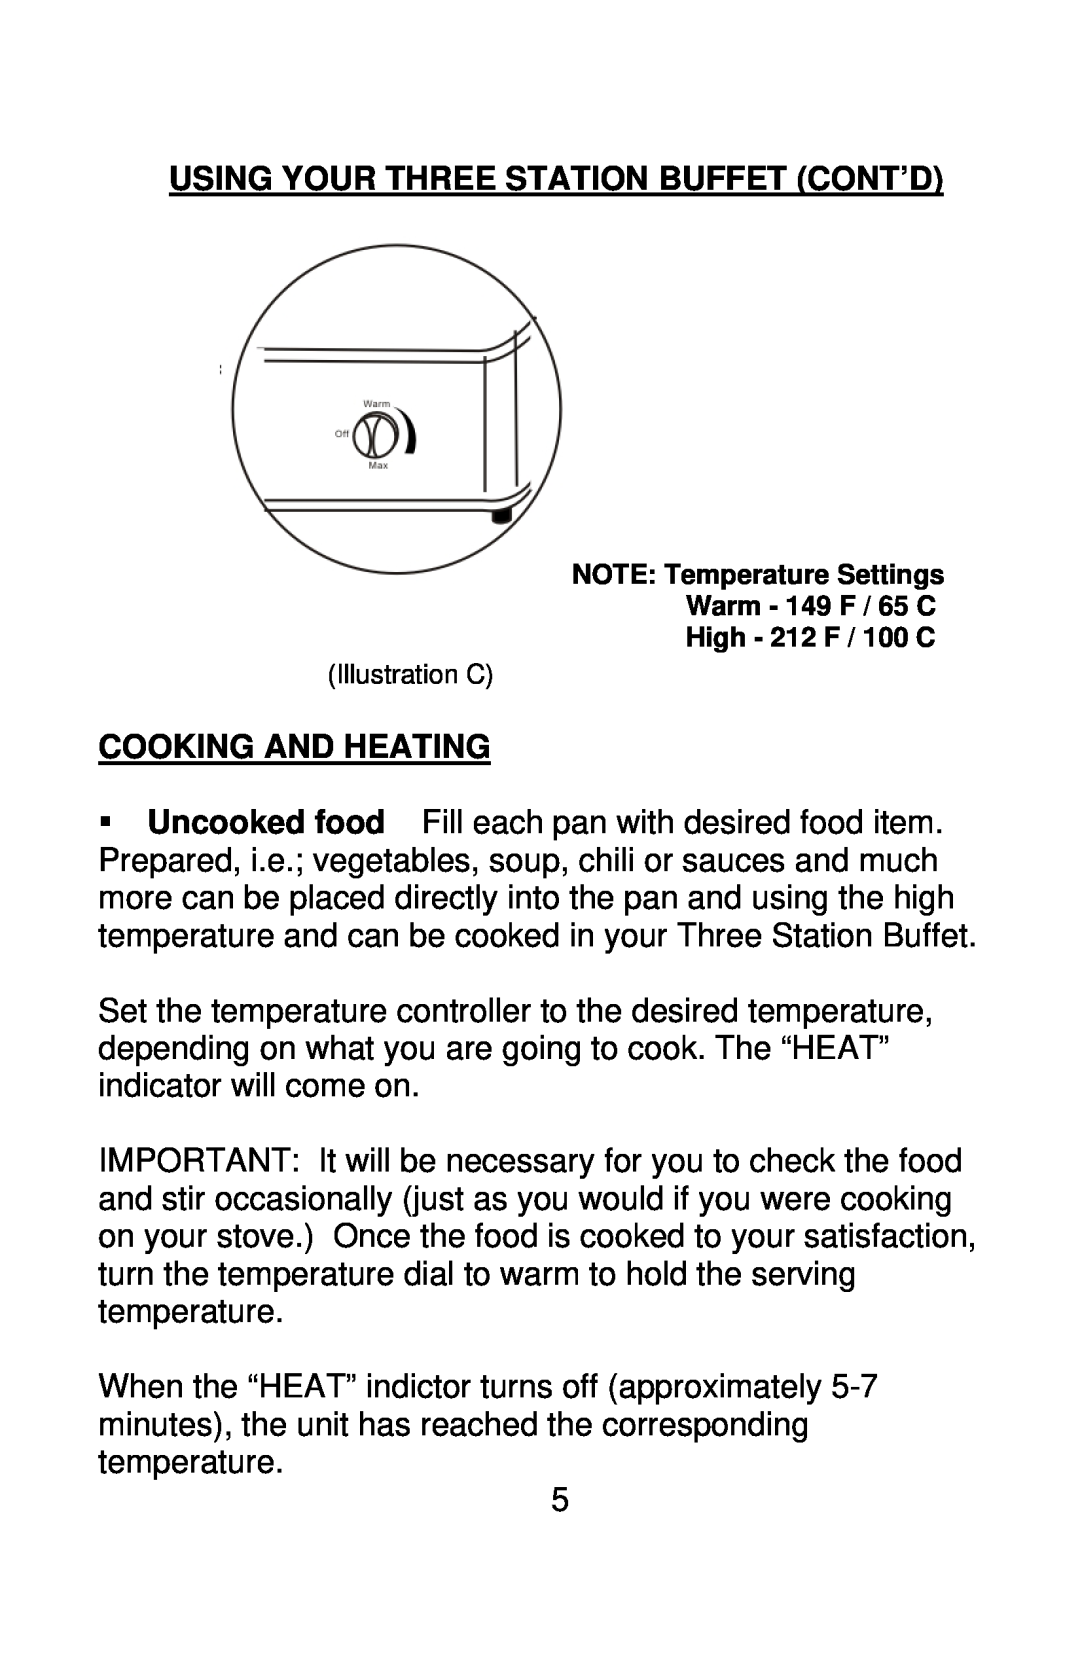 Nostalgia Electrics BCS-997, BCD-997 manual Using Your Three Station Buffet Cont’D, Cooking And Heating 